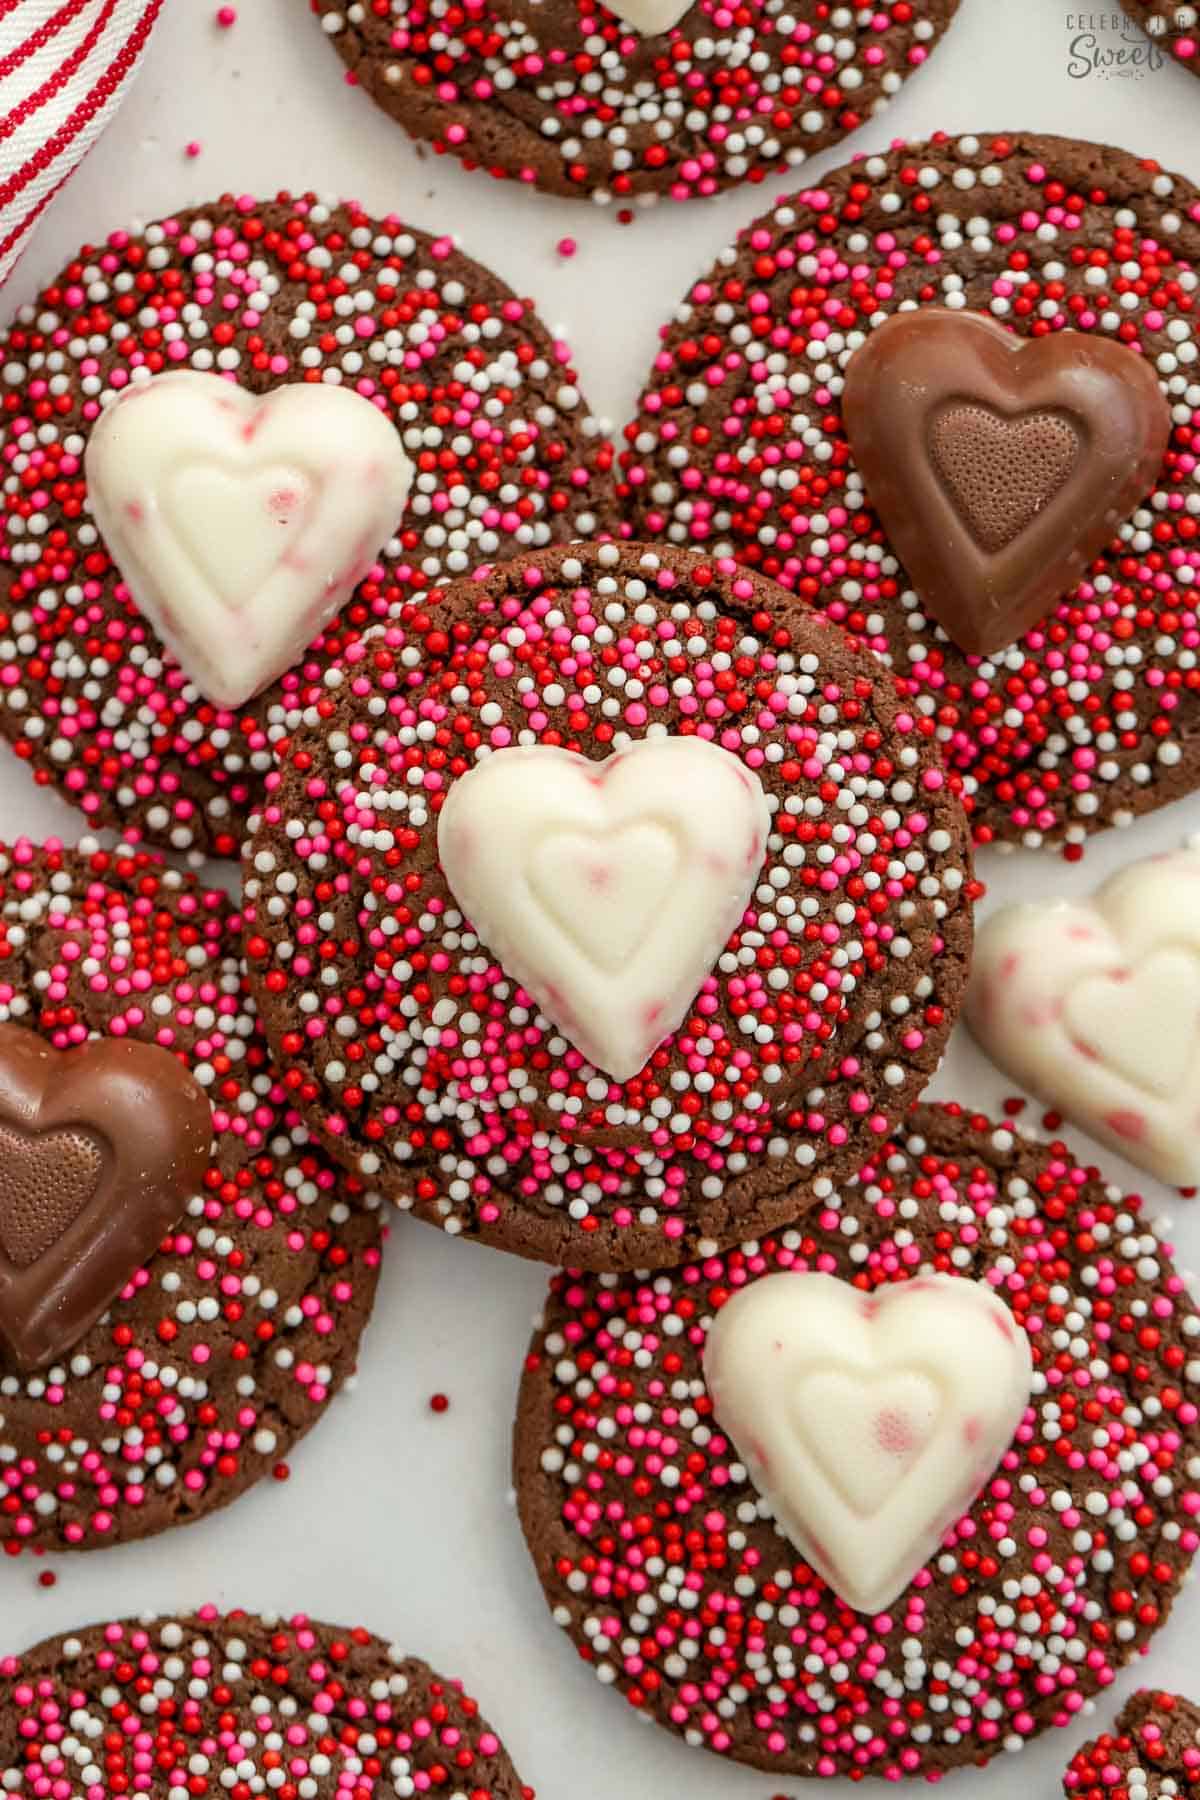 Chocolate cookies covered in pink and red sprinkles topped with a candy heart.